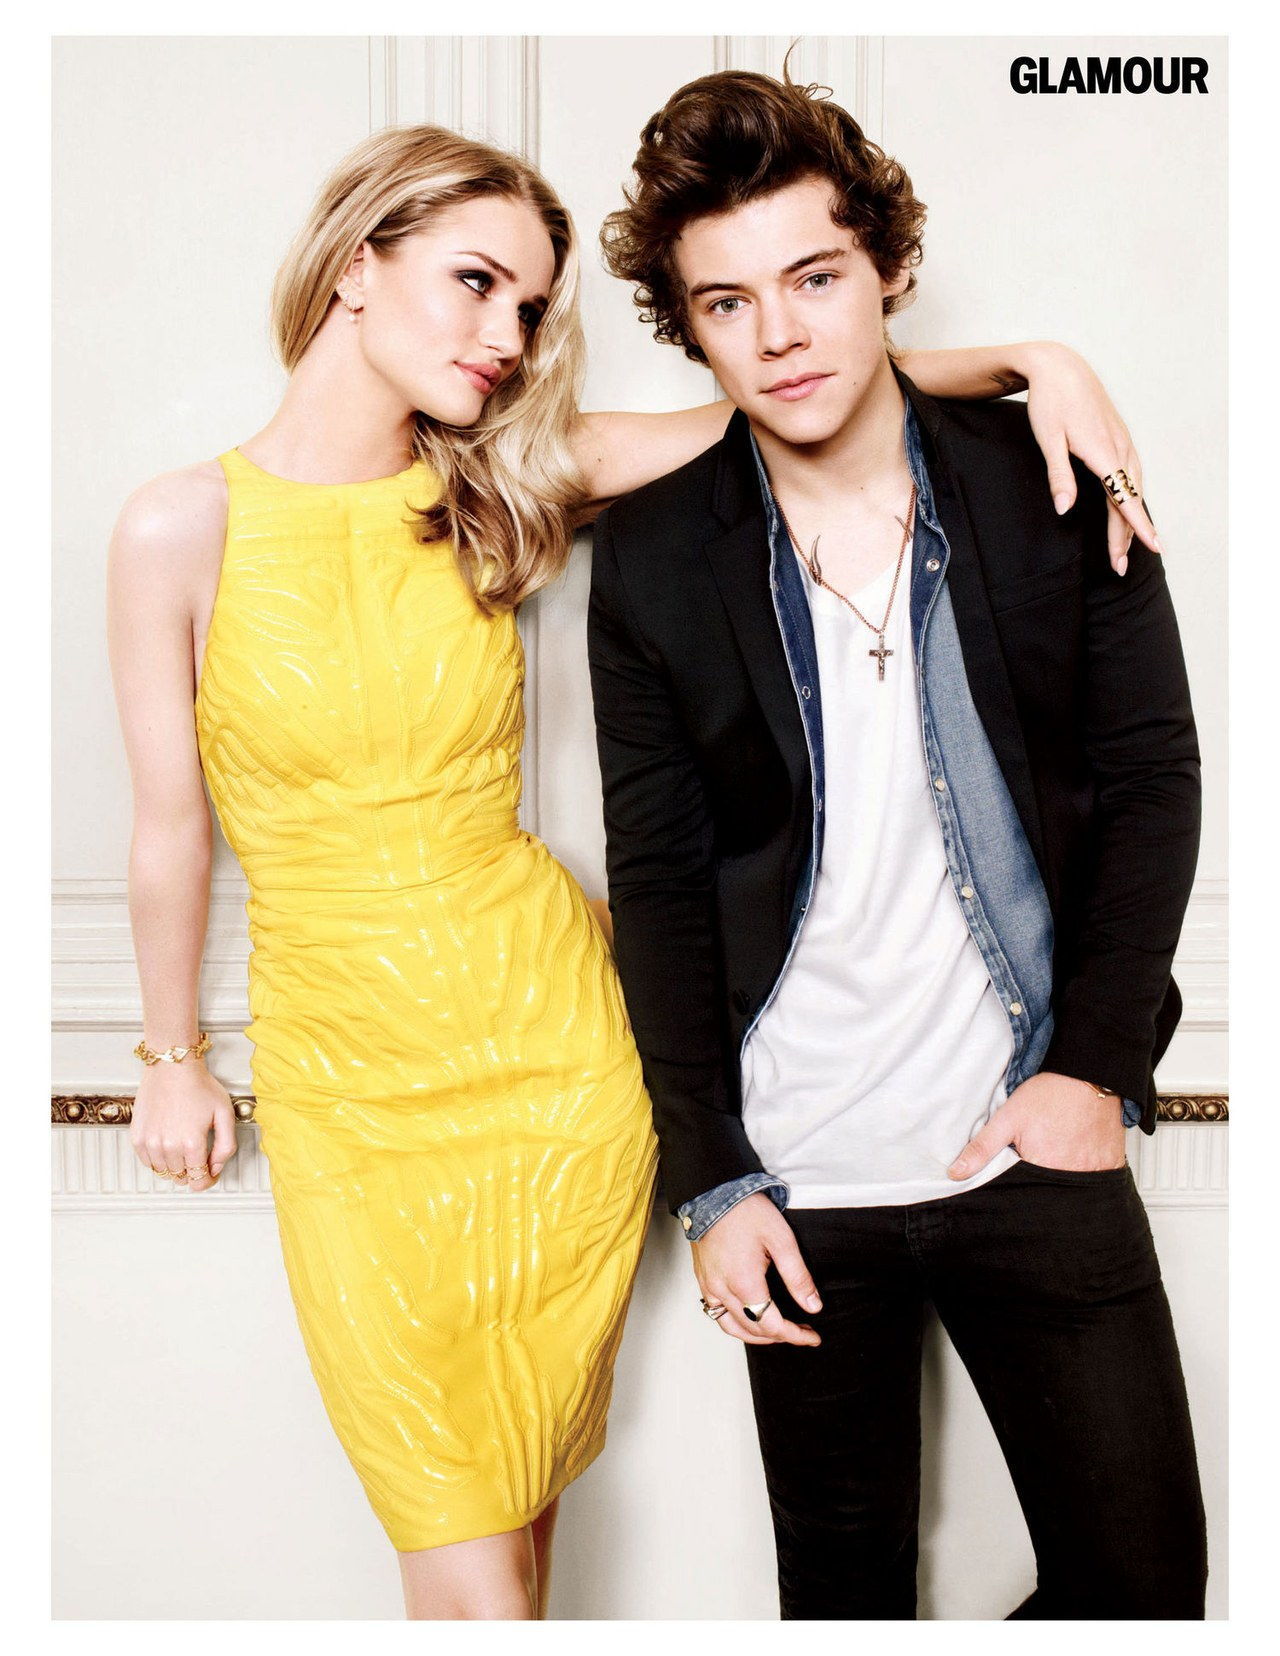 Rosie Huntington-Whiteley and Harry Styles From *Glamour*'s August Issue